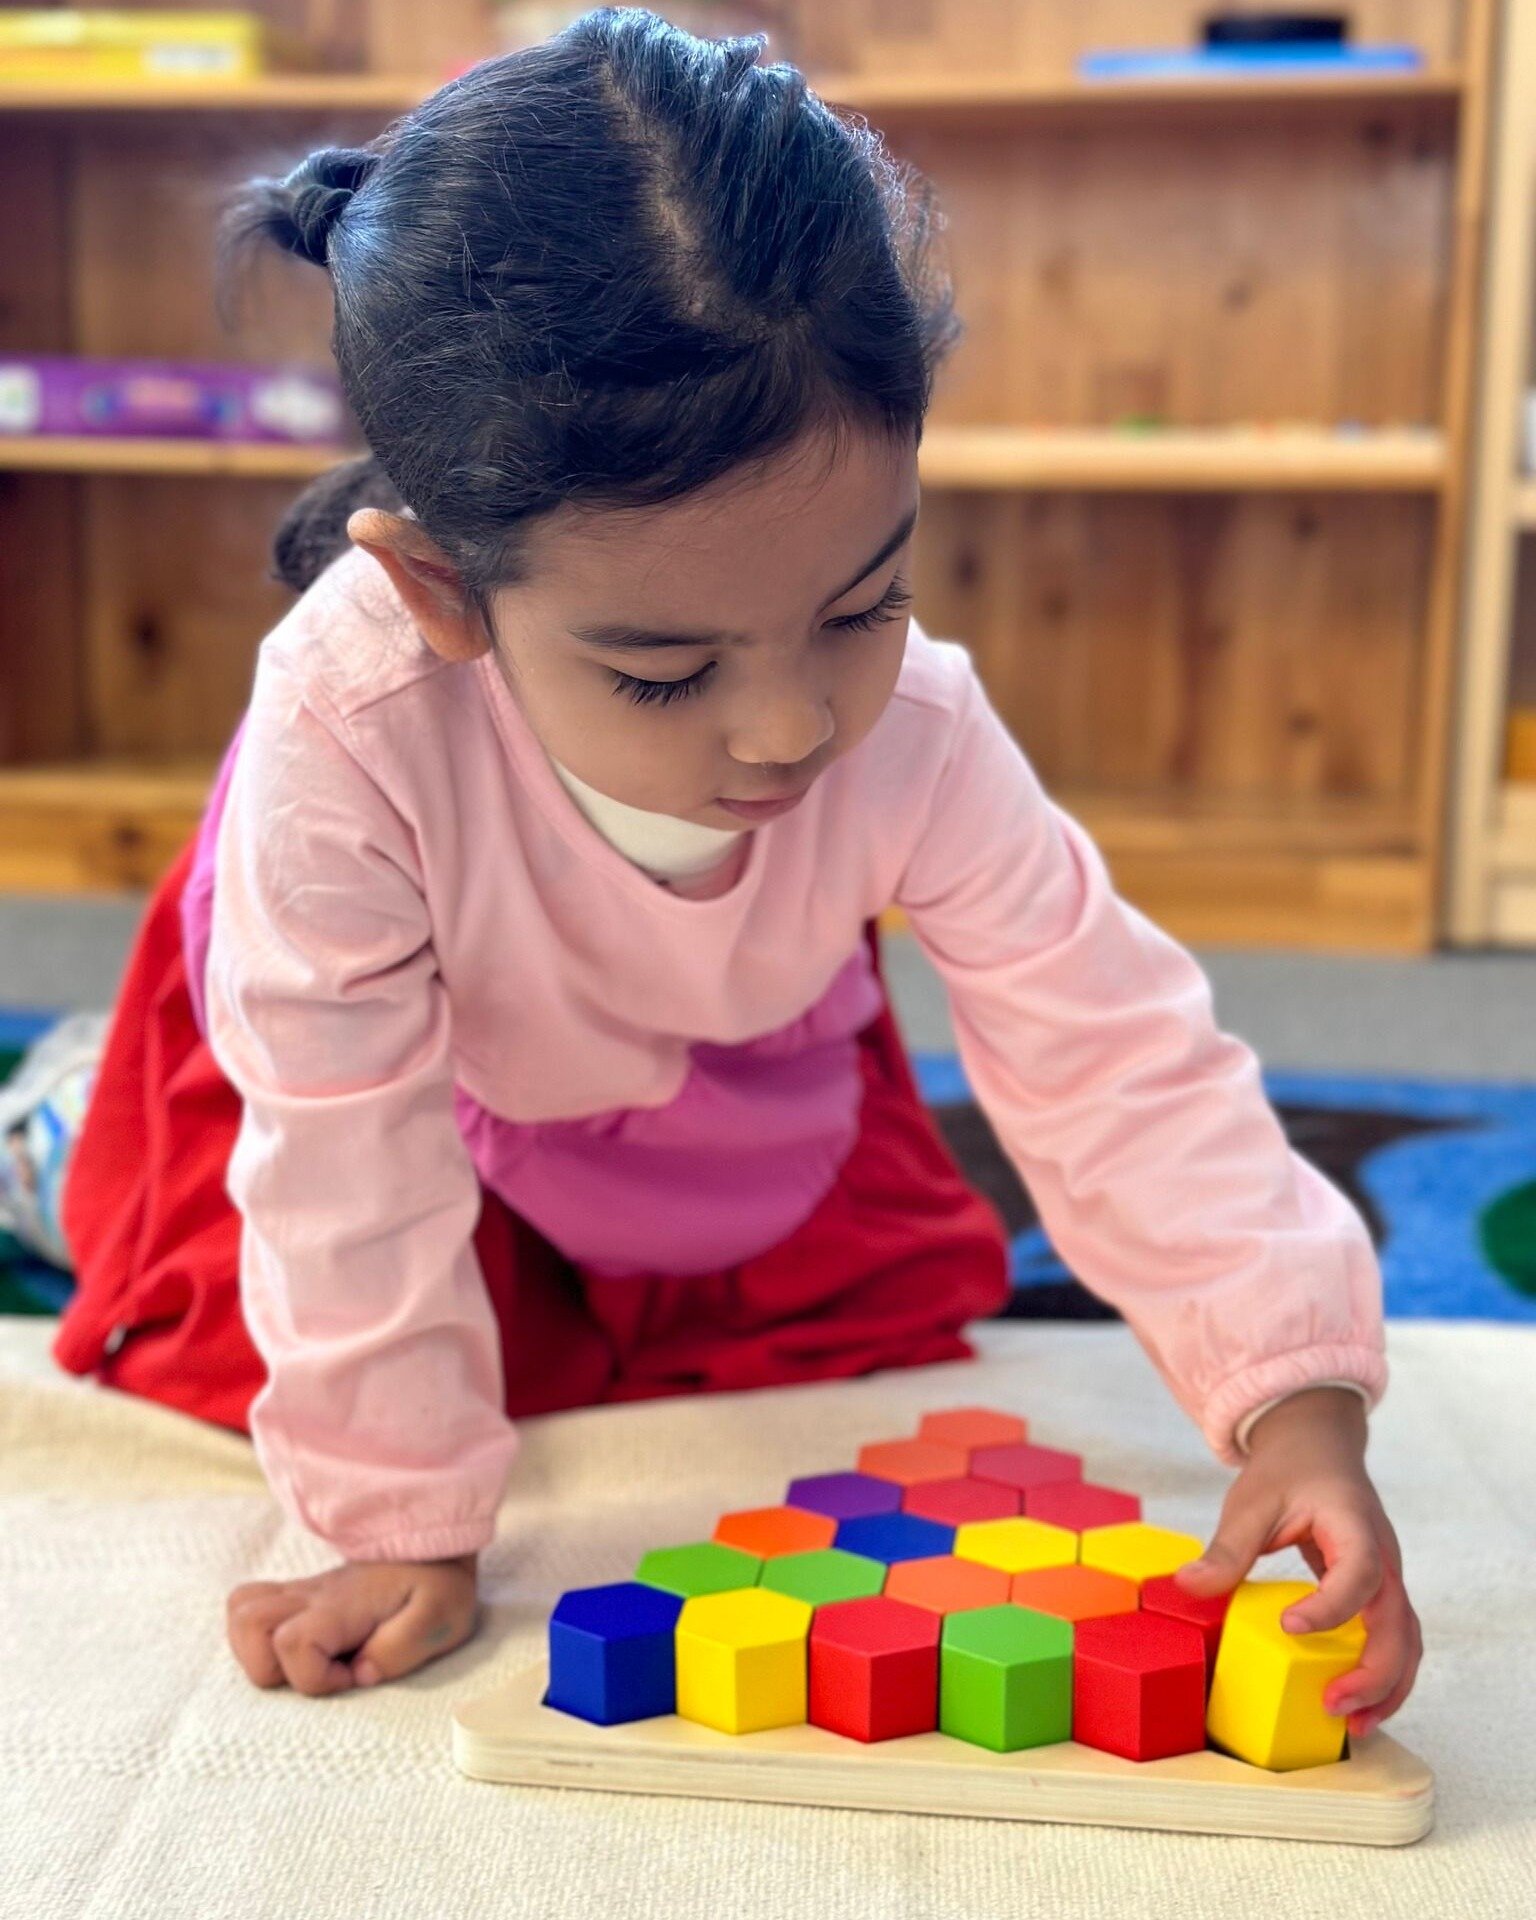 Students have fun fitting the shapes together and noticing the different colors. They develop their concentration, fine motor skills and confidence.

#montessorimaterial #finemotorskill #concentration